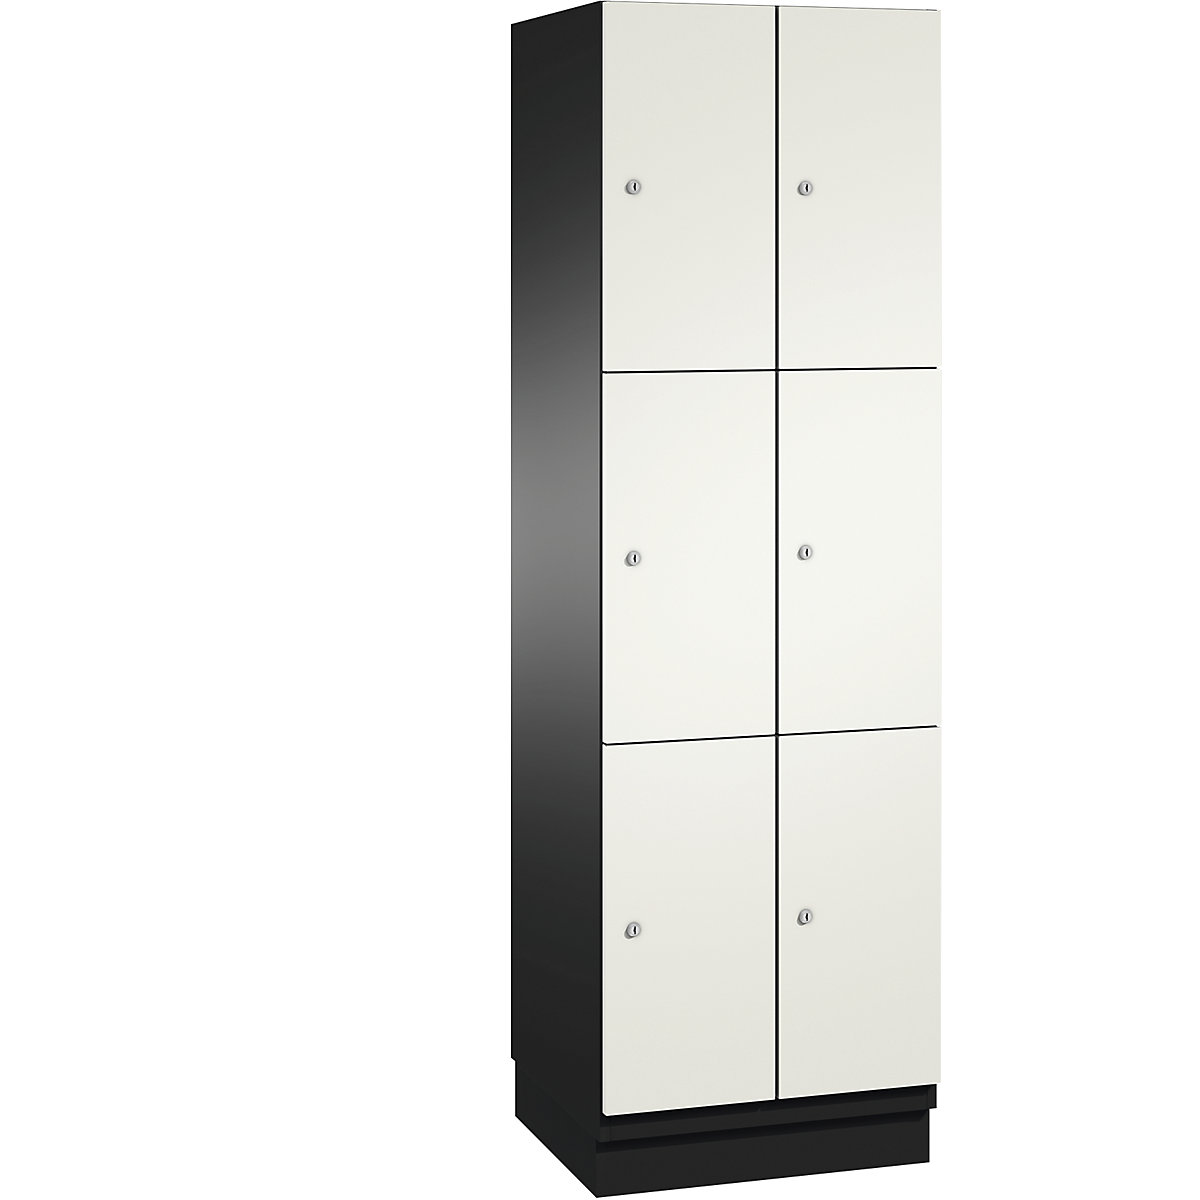 CAMBIO compartment locker with sheet steel doors – C+P, 6 compartments, width 600 mm, body black grey / door pure white-2